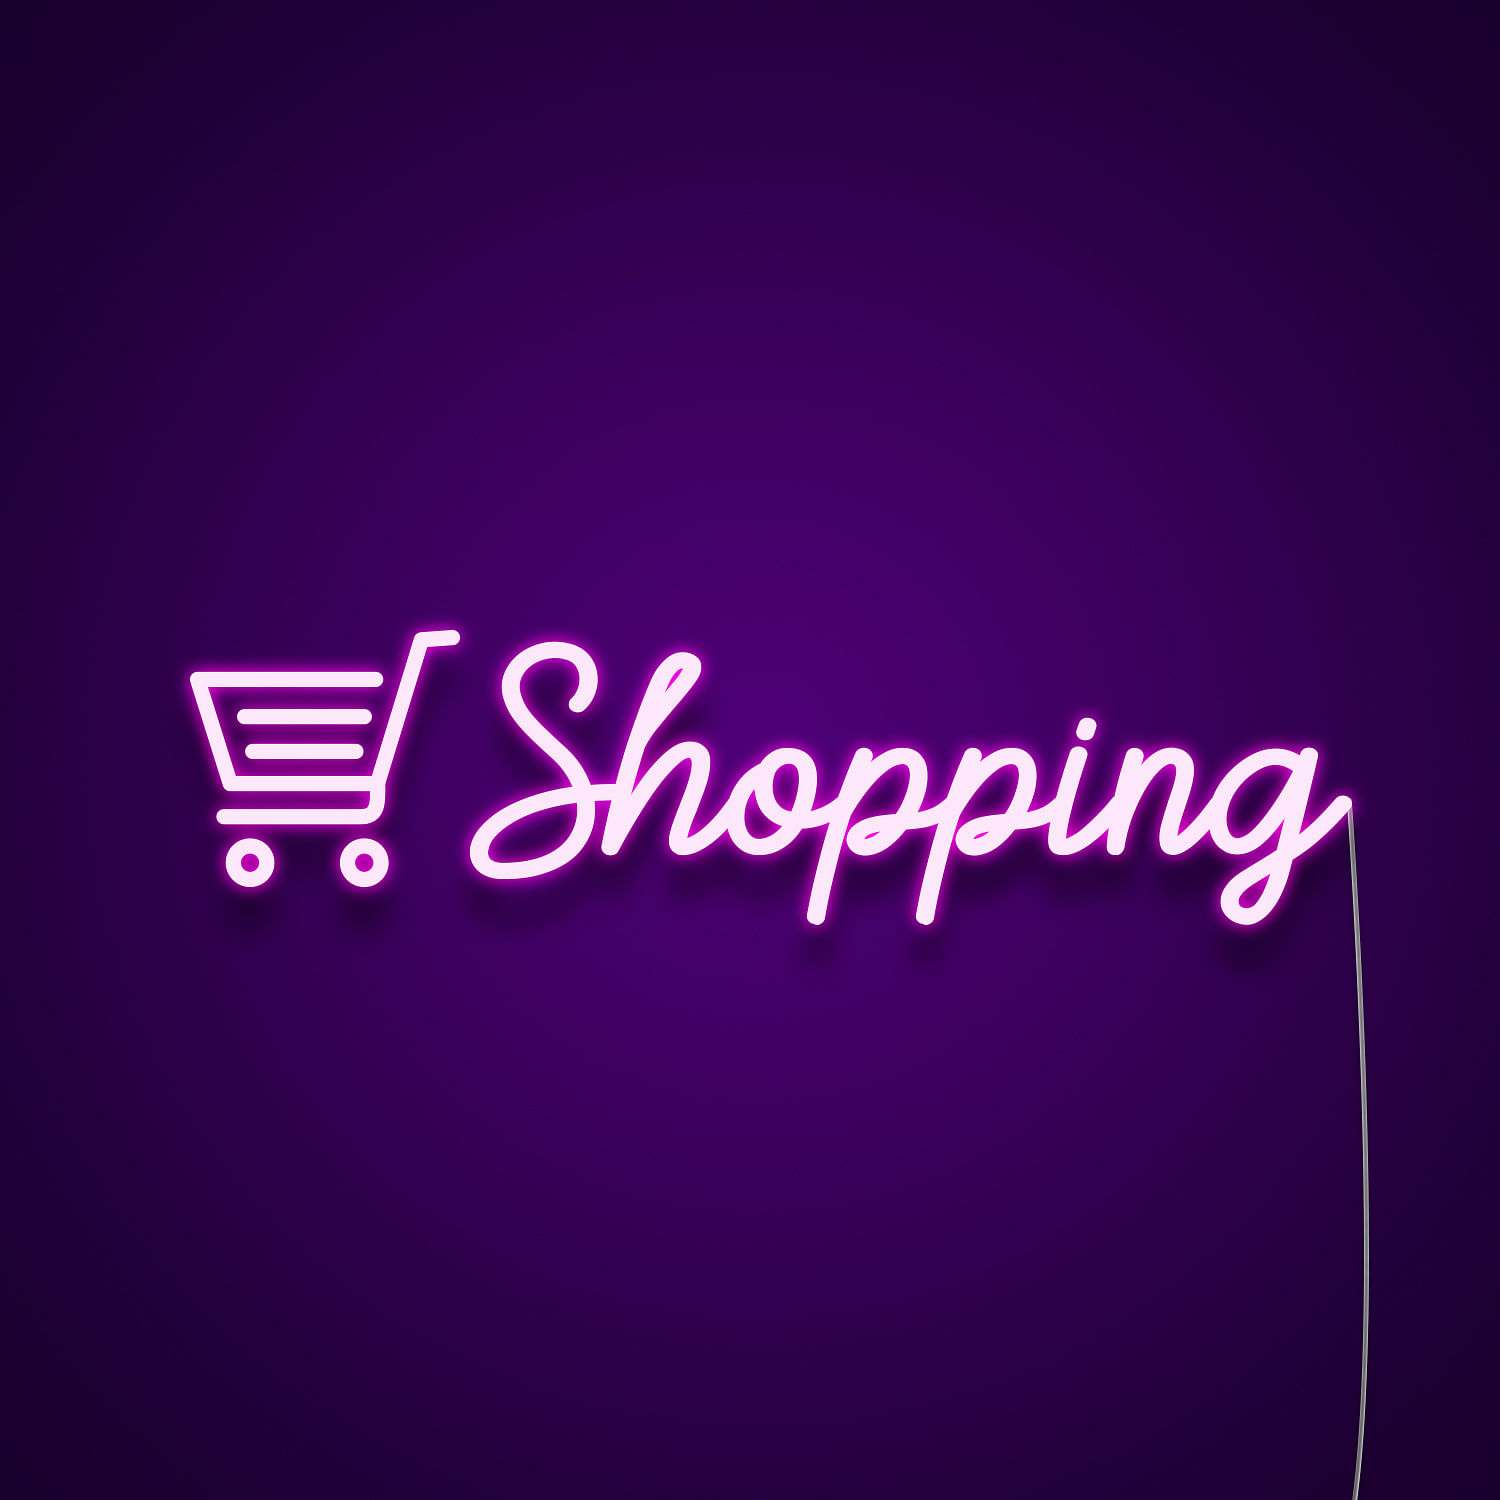 Shopping Cart Neon Sign | Neon Sign for Business | Neonize